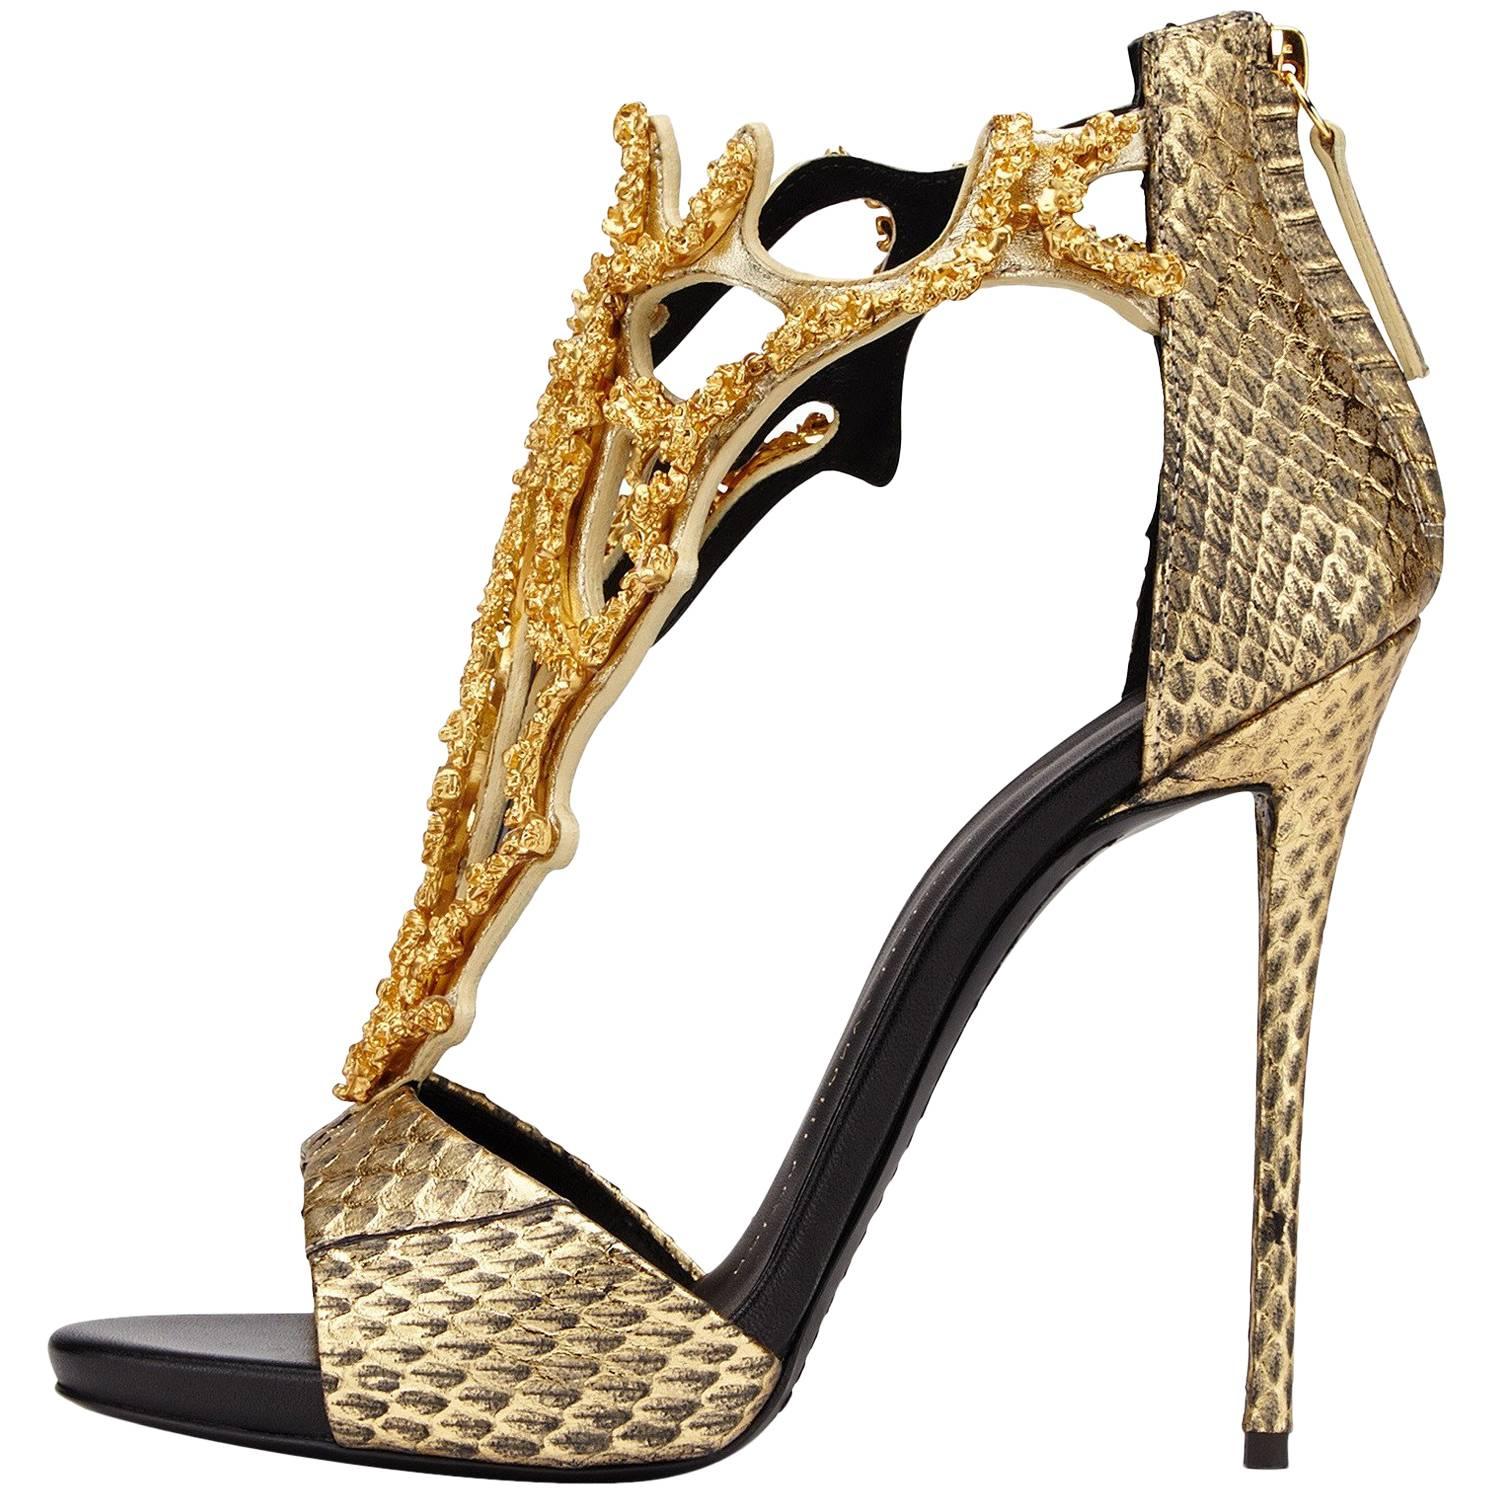 Giuseppe Zanotti New Leather Gold Coral Crystal Evening Sandals Heels 